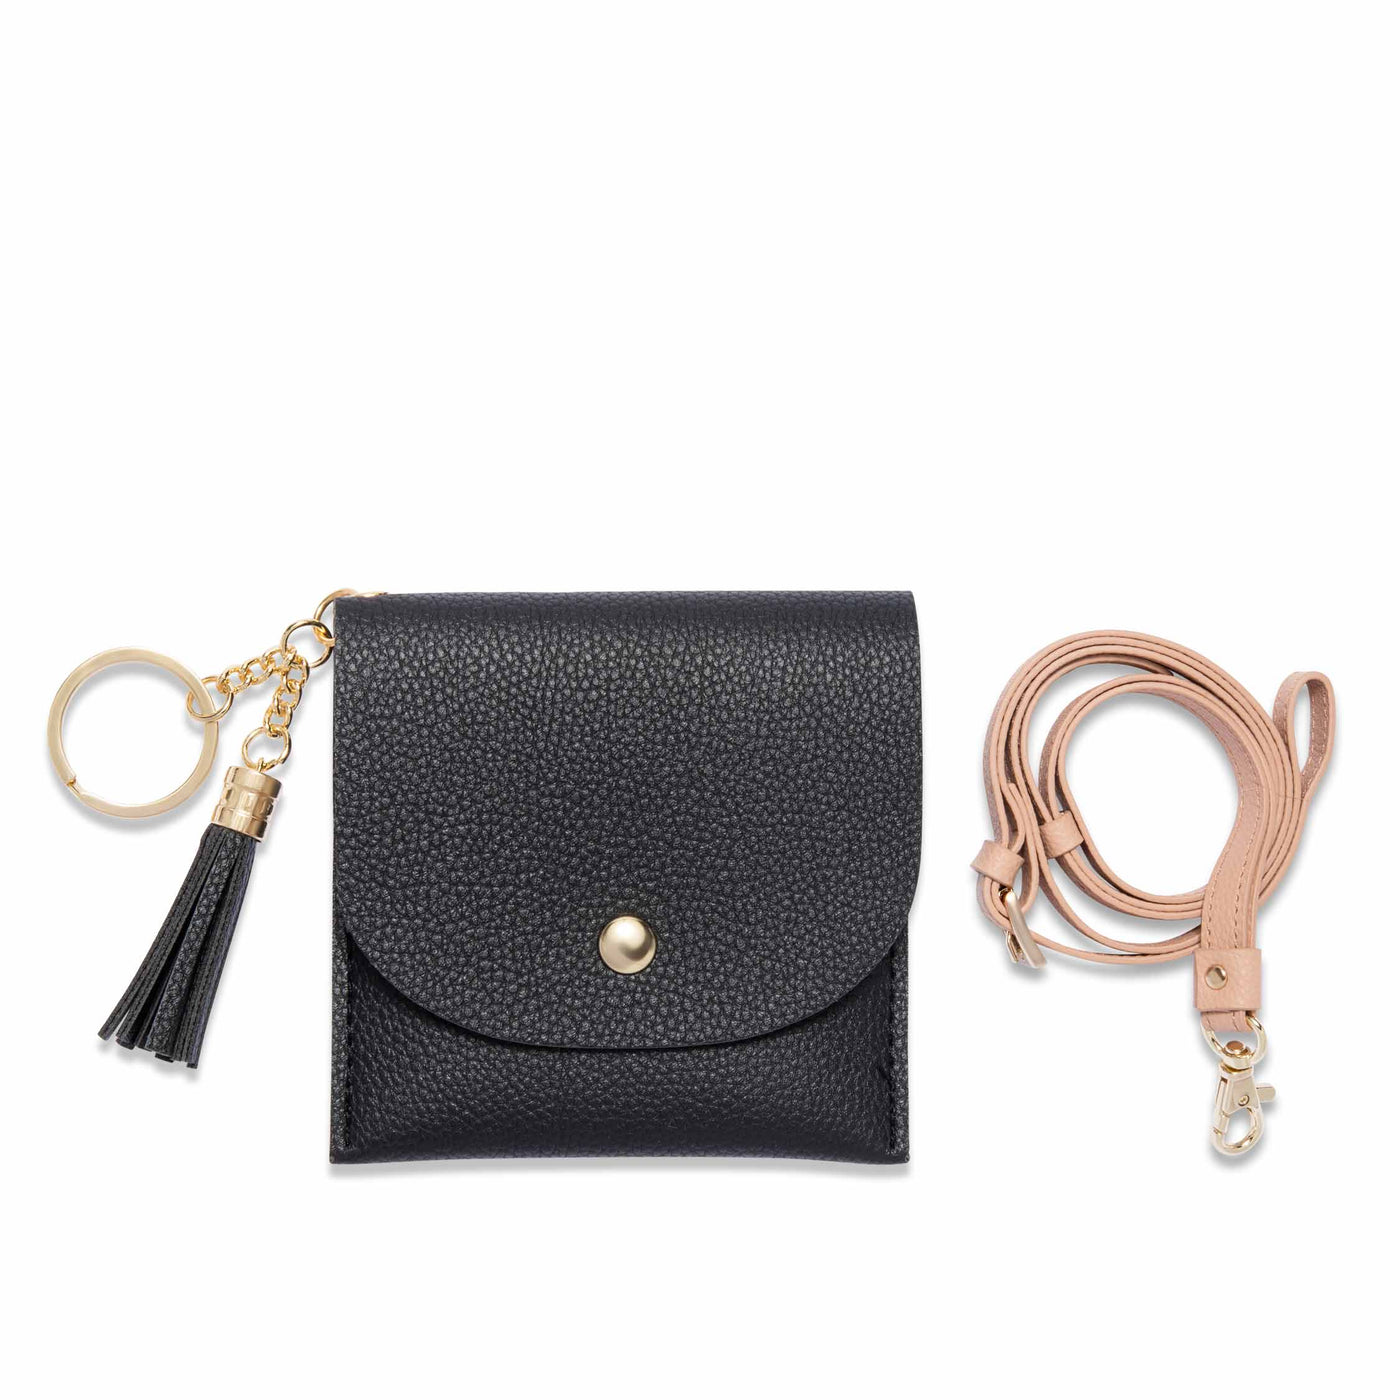 Lark and Ives / Vegan Leather Accessories / Small Accessories / Wallet / Mini Wallet / Card Case / Card Holder / Button snap closure / Flap Wallet / Card Purse with Gold Button and Keyring / Lanyard / Card Purse with Lanyard / Black